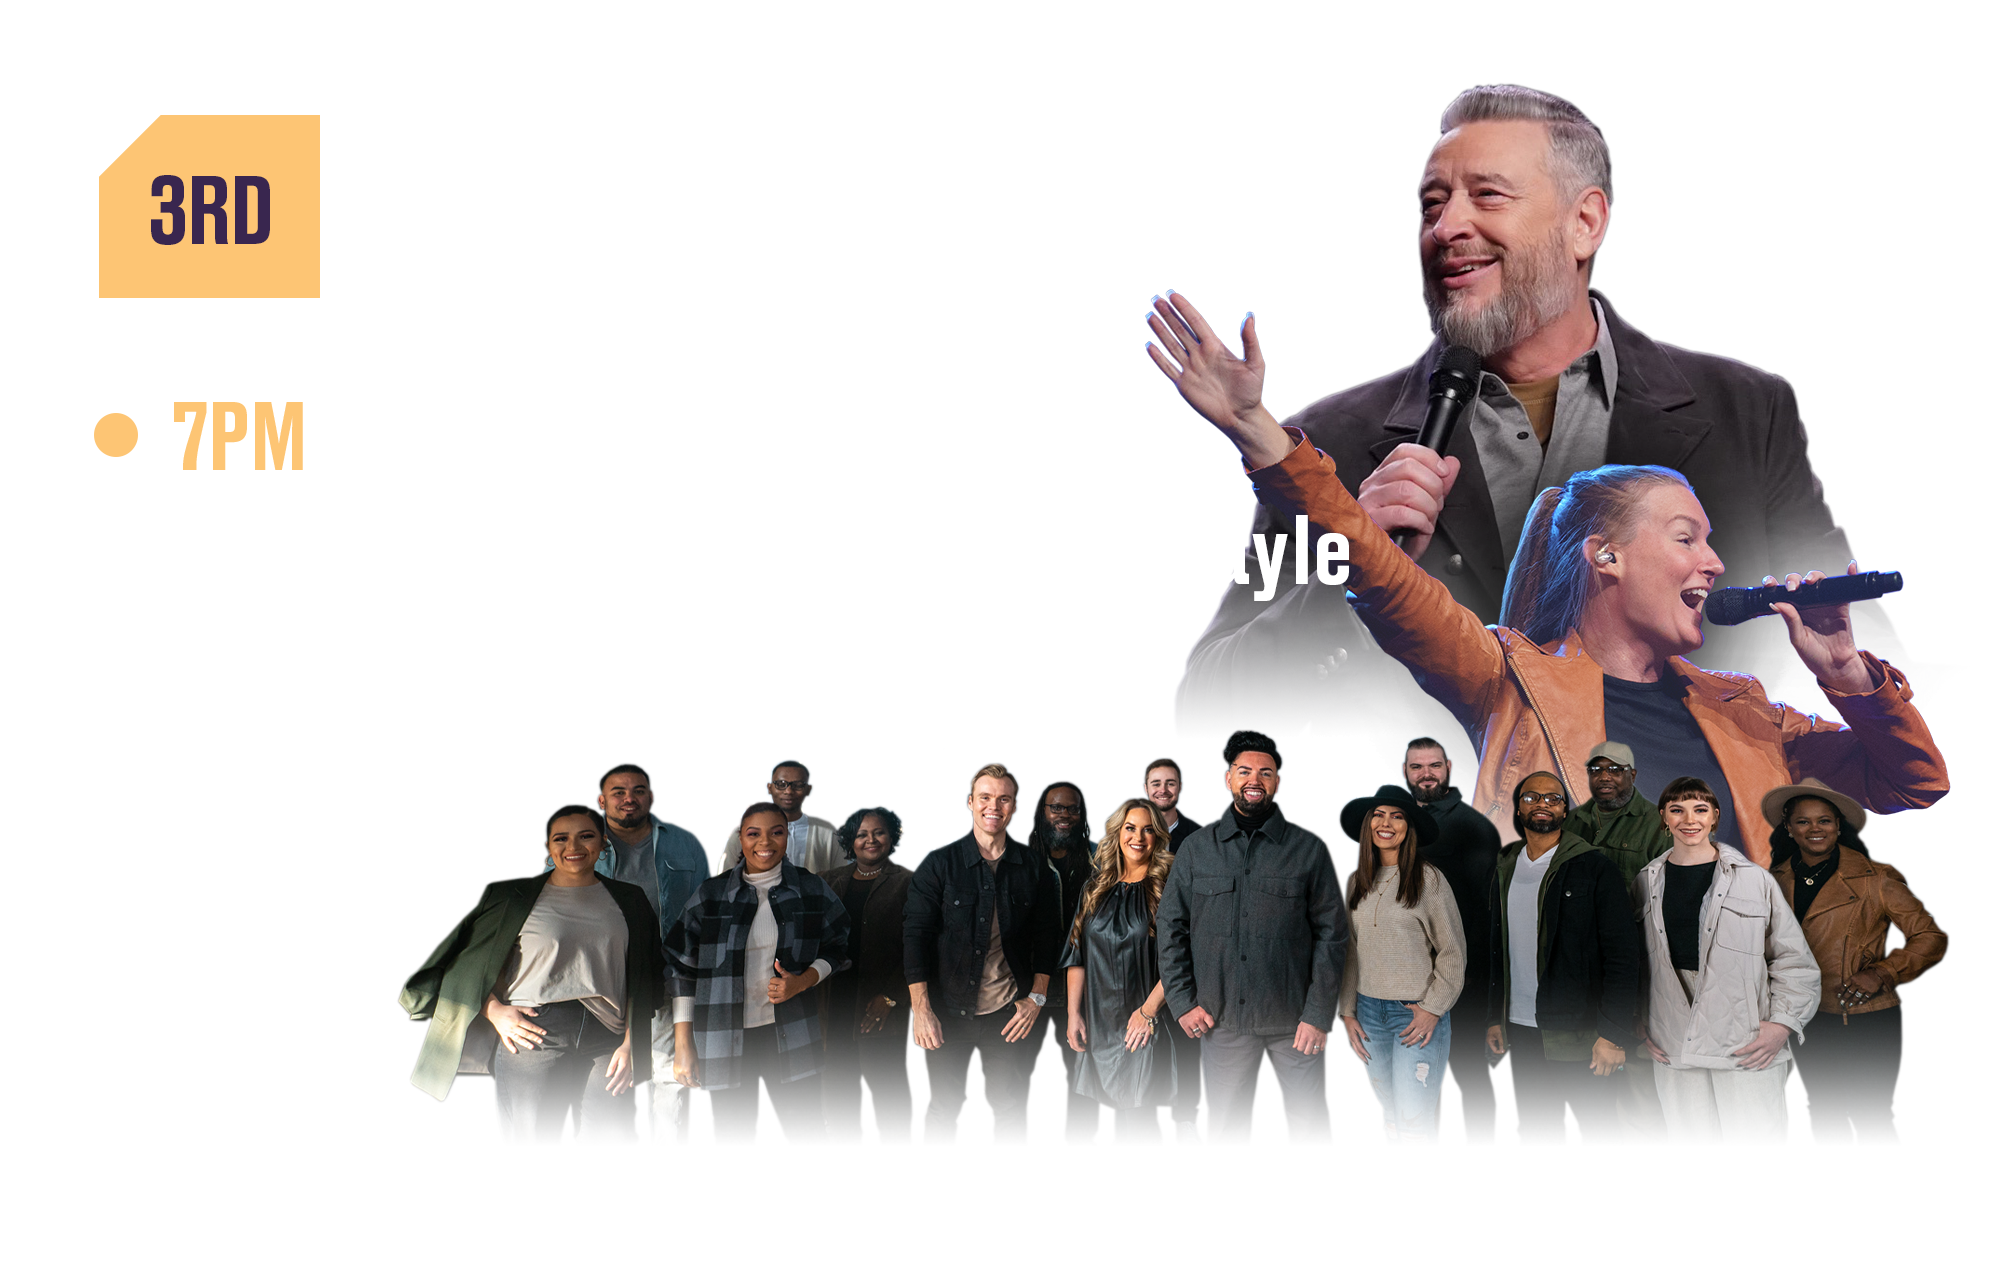 3rd Wednesday Night 7PM With Dr. Rod Parsley, Special guest Charity Gayle and Harvest Music Live